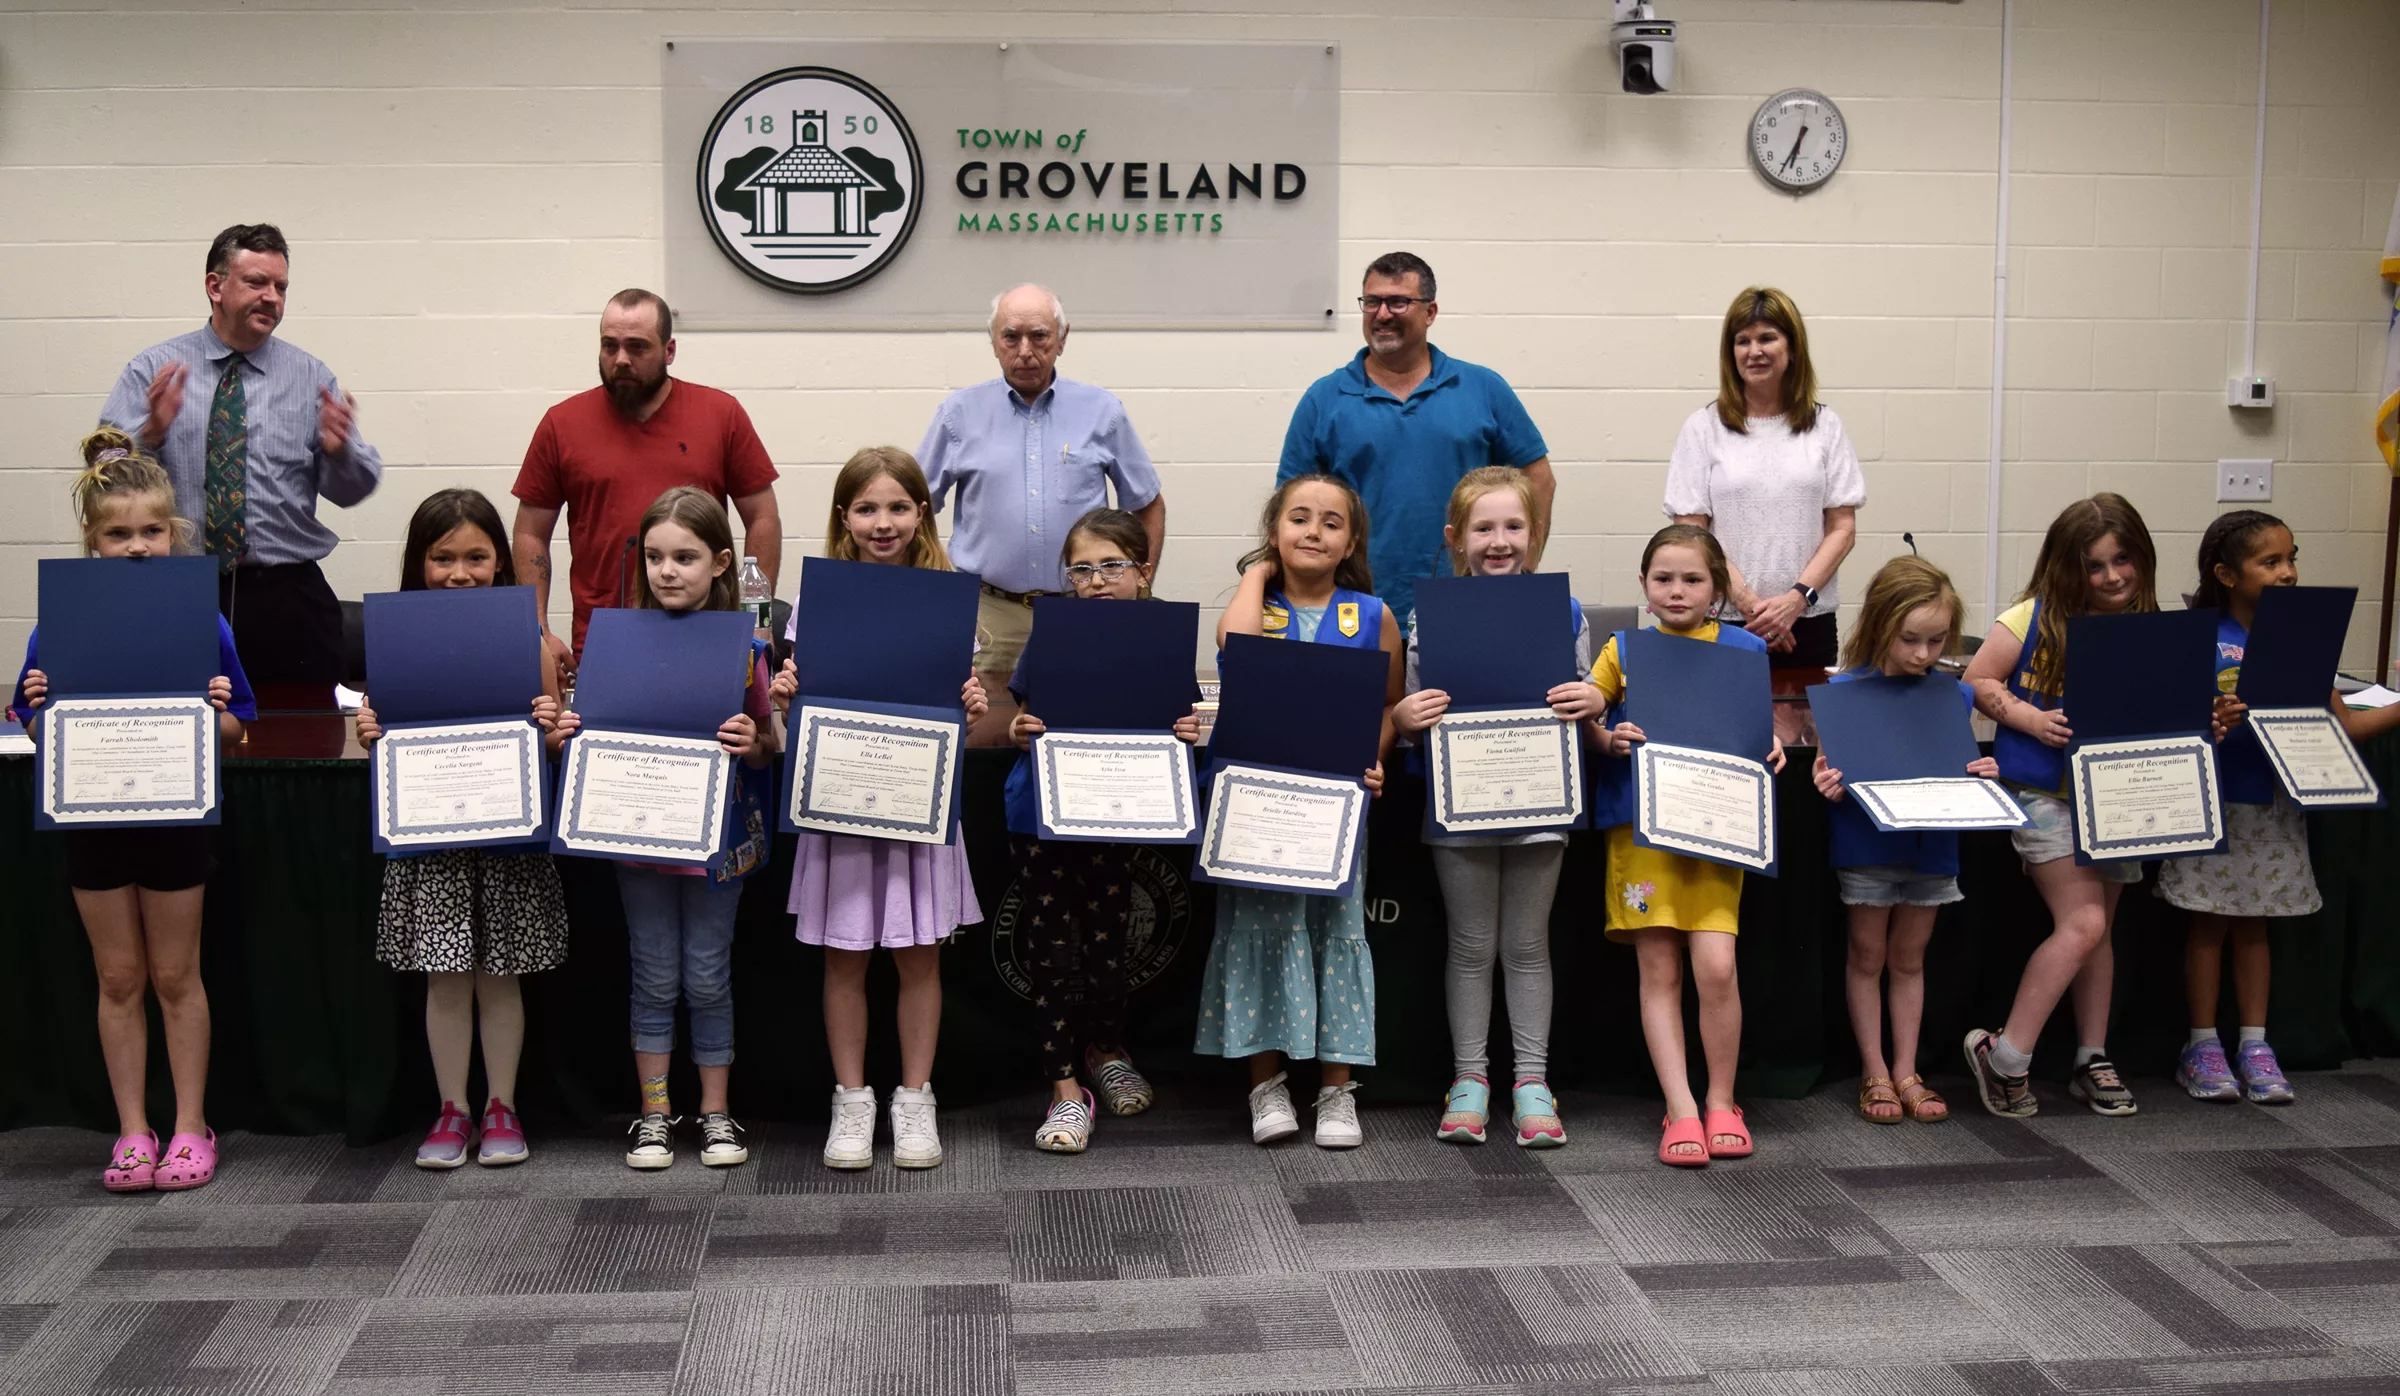 Daisy Scout Troop Recognized by Groveland Selectmen for Providing